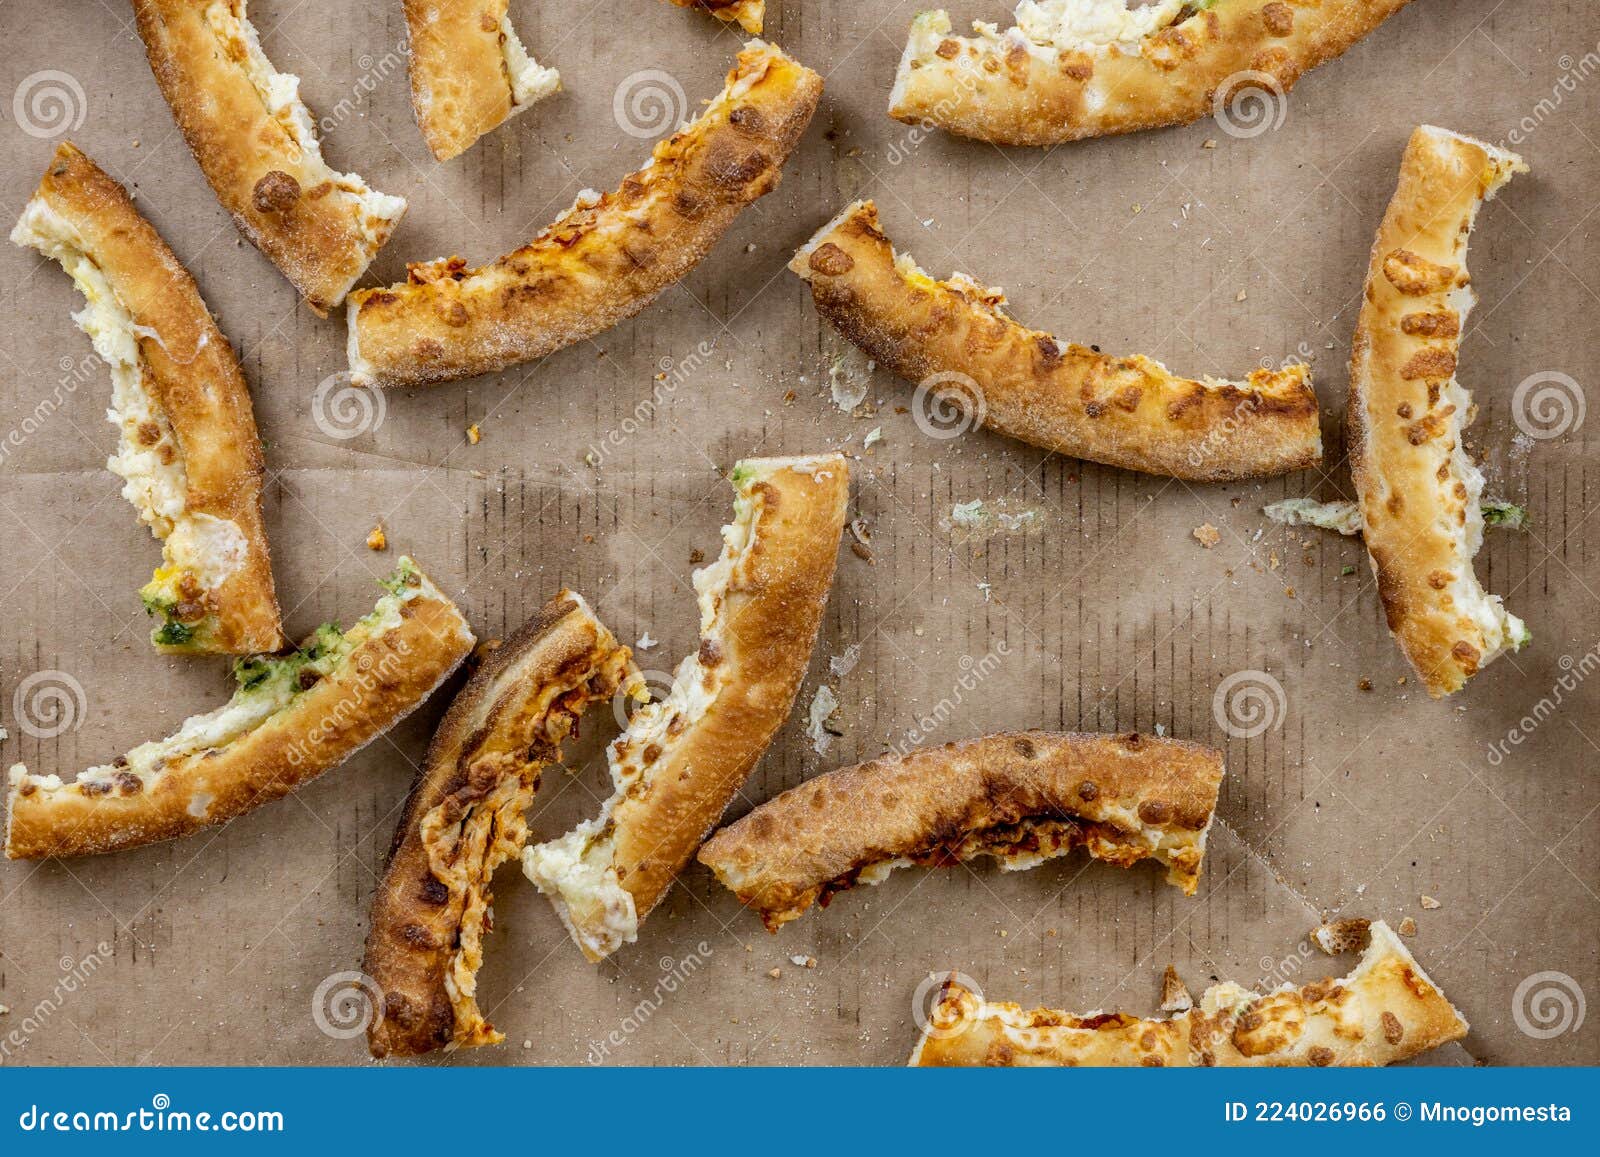 Pizza Crusts in a Greasy Box on a Home Table. Leftover Pieces of ...